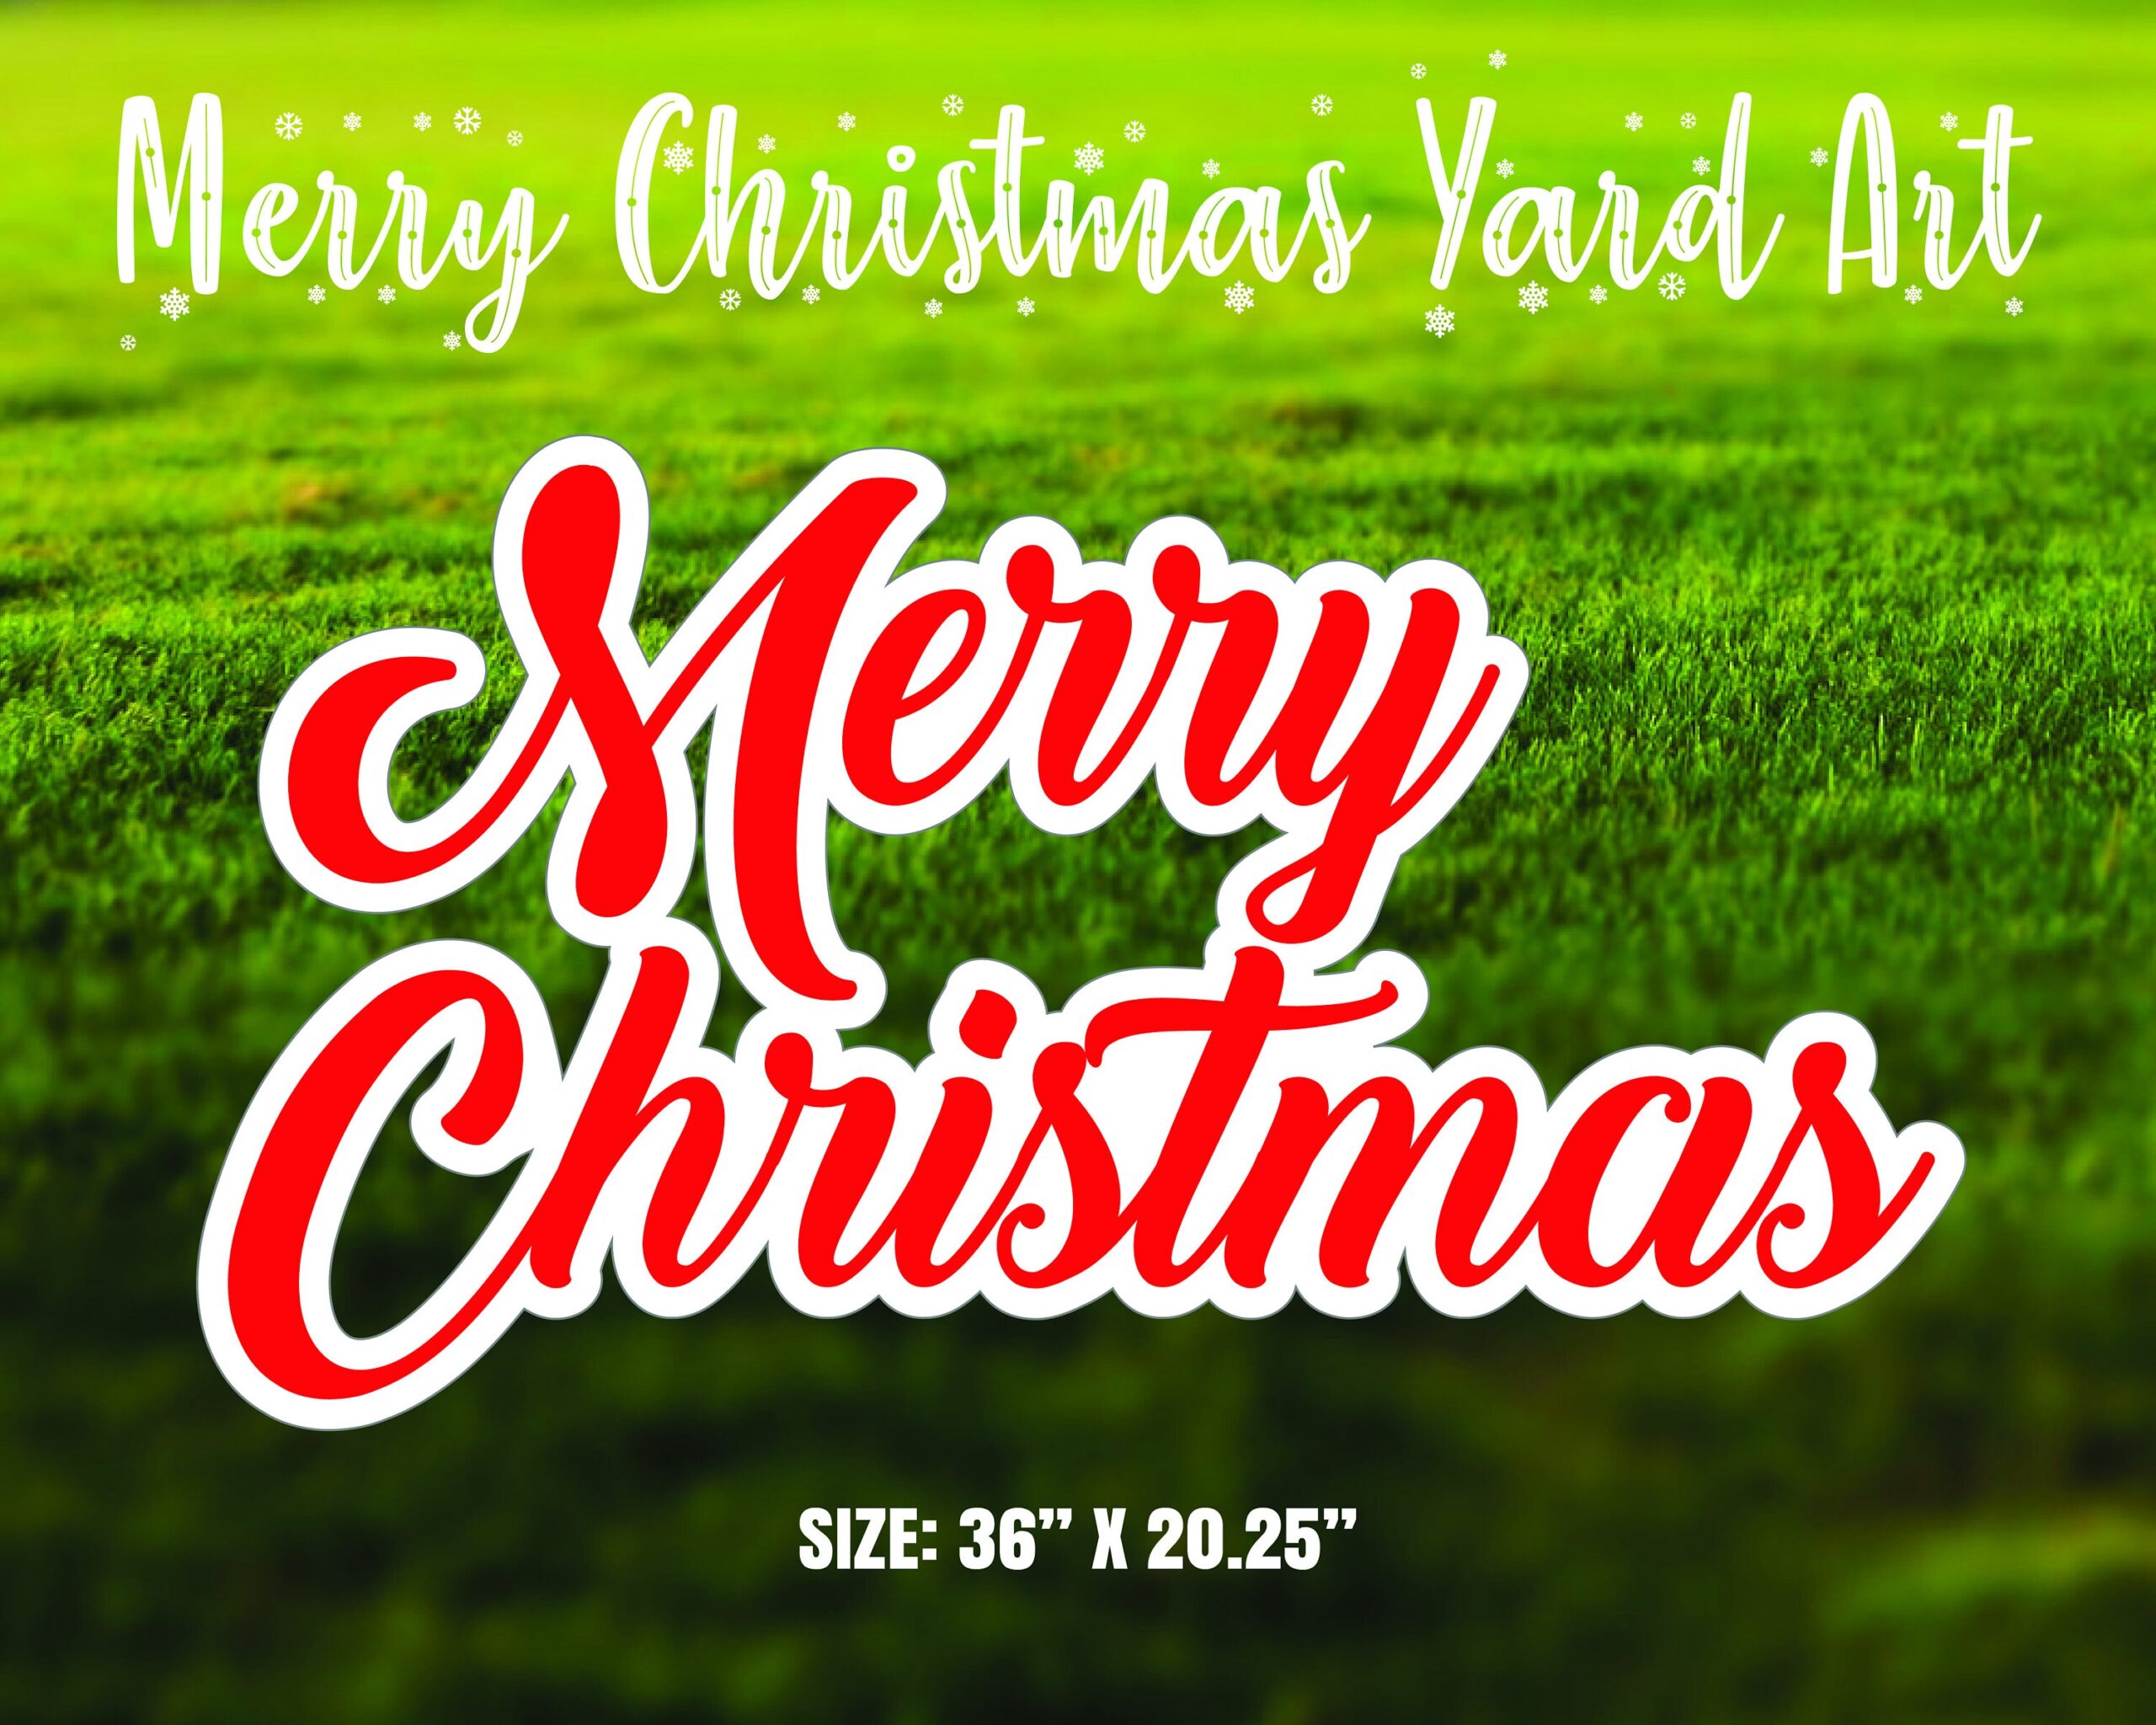 Merry Christmas Yard Sign | Buy Online at Flexpress